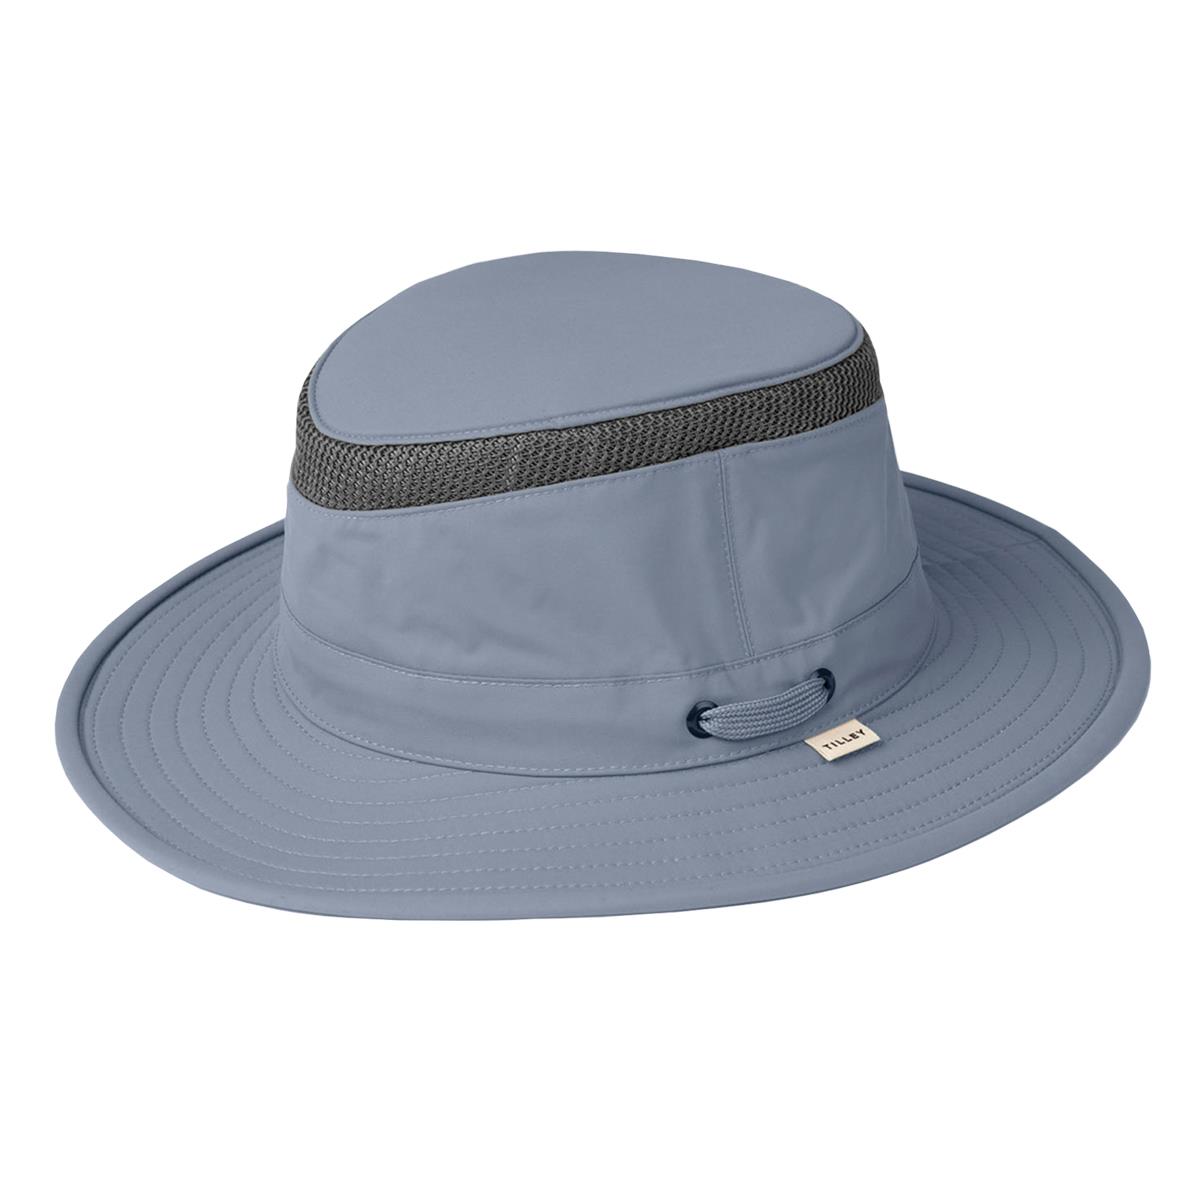 What is the reference number for the Tilley LTM5 hat?